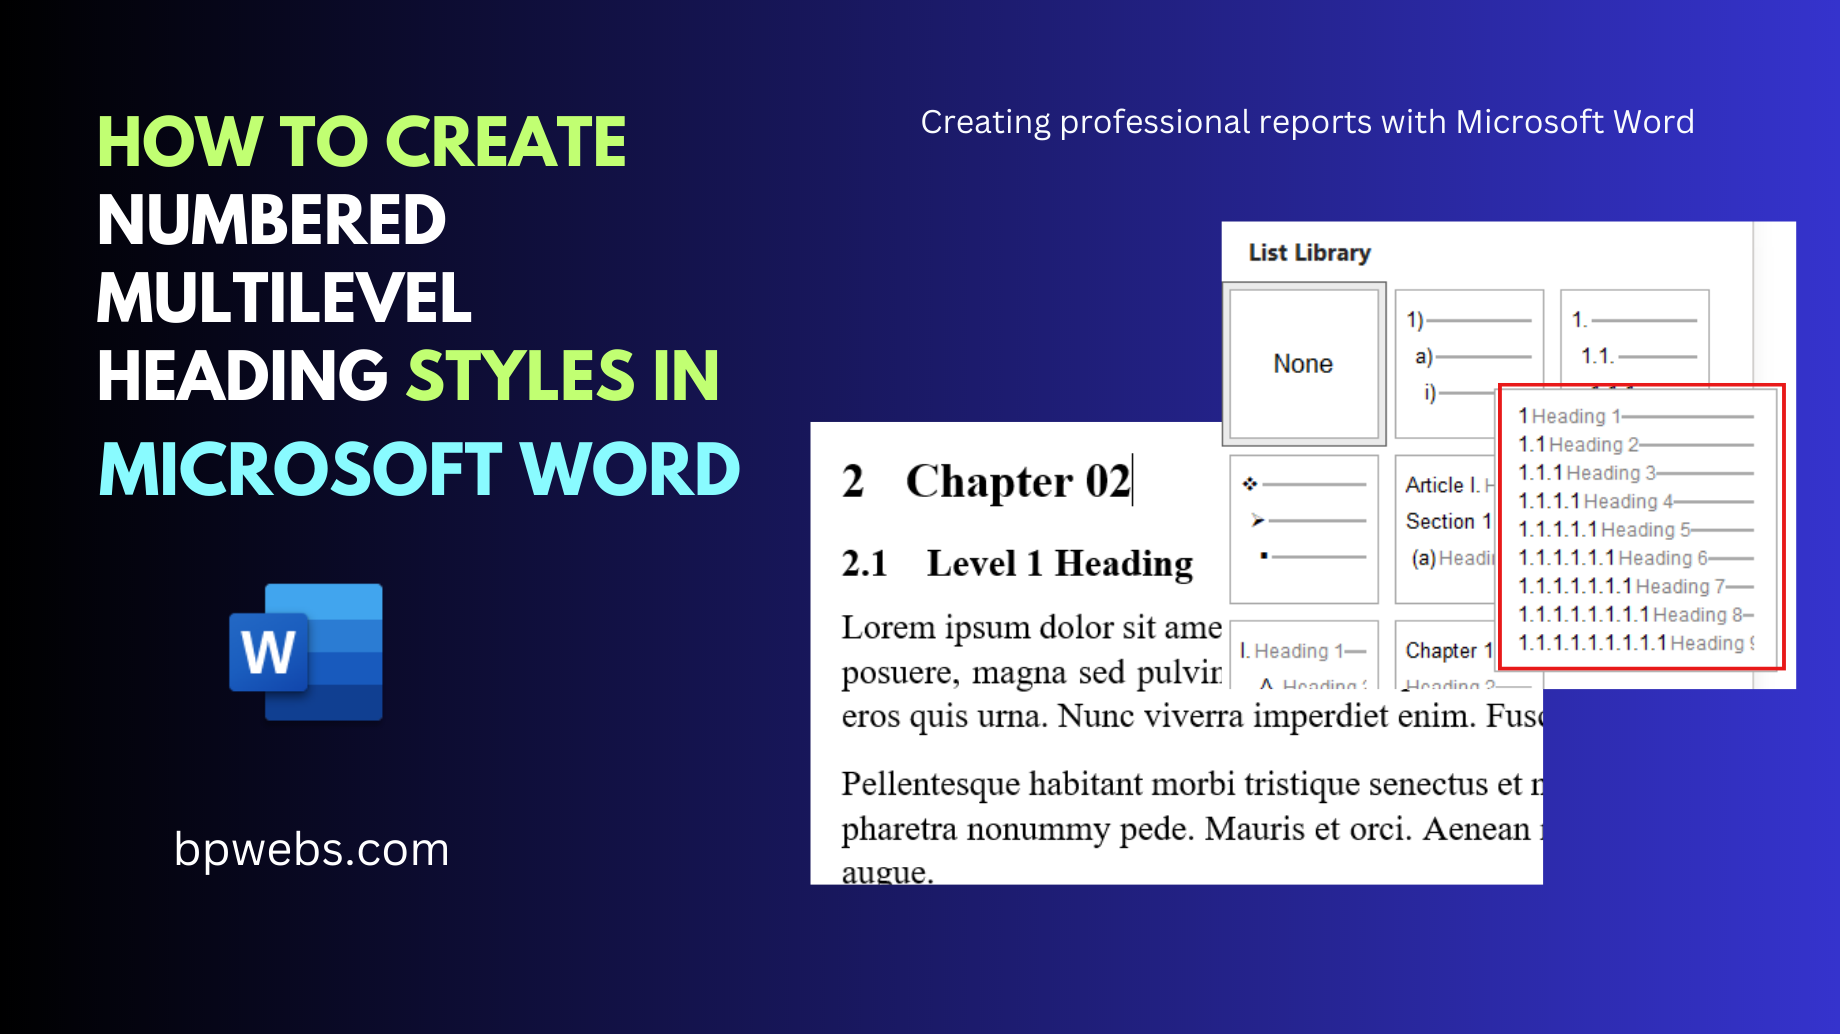 Numbered Multilevel Heading Styles in Microsoft Word